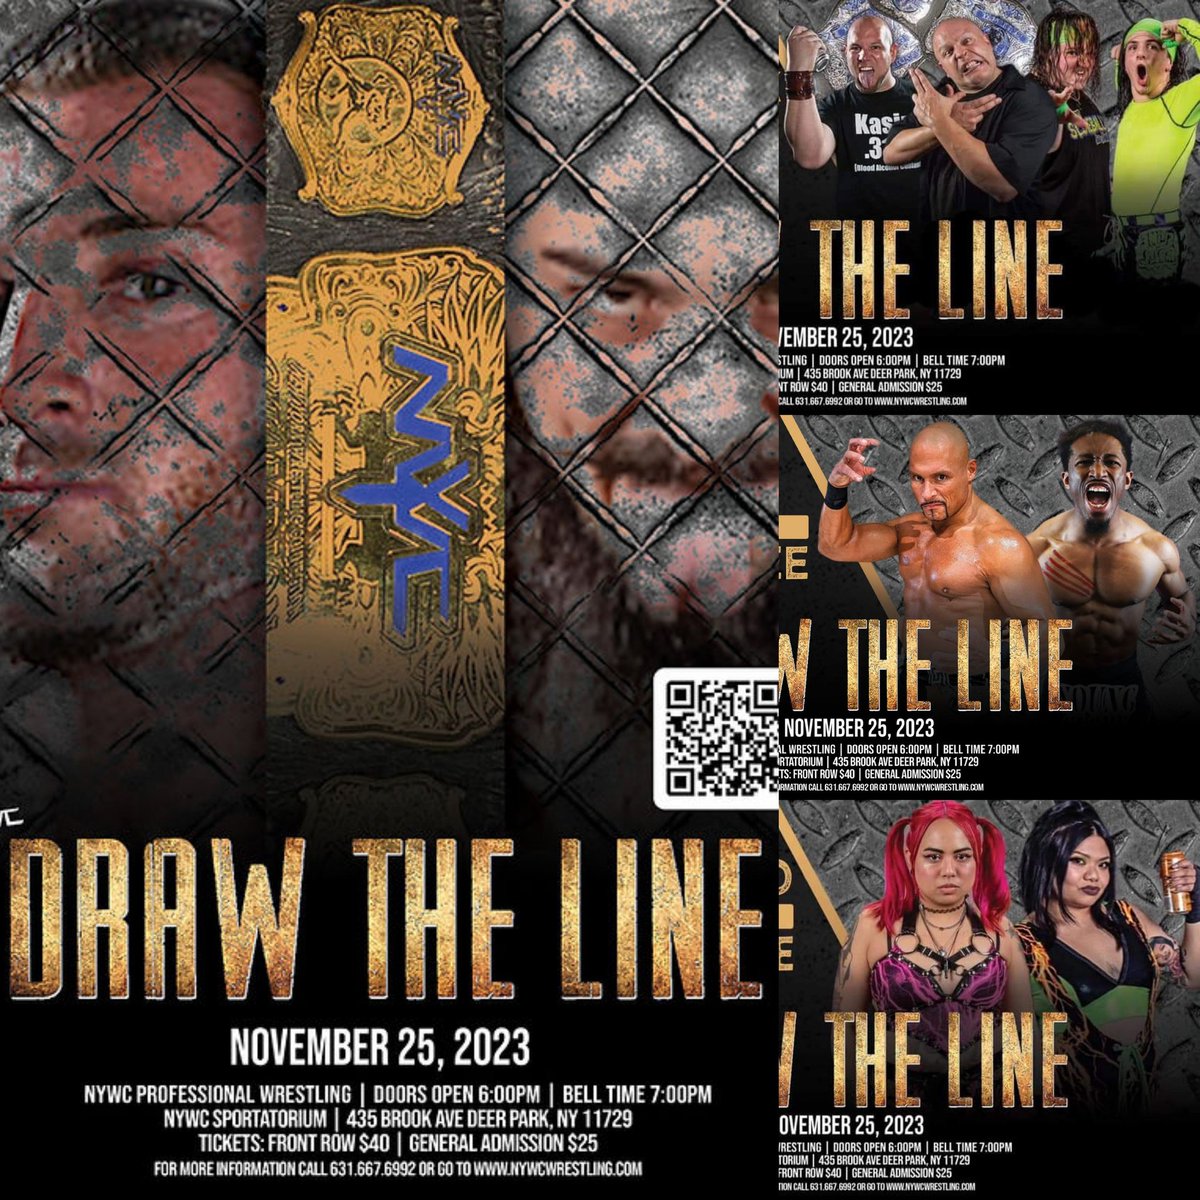 This card is just heating up! Stay tuned for more announcements about Draw the Line in the next few days! Tickets are still available at nywcwrestling.com Draw the Line takes place on November 25th at the NYWC Sportatorium in Deer Park!